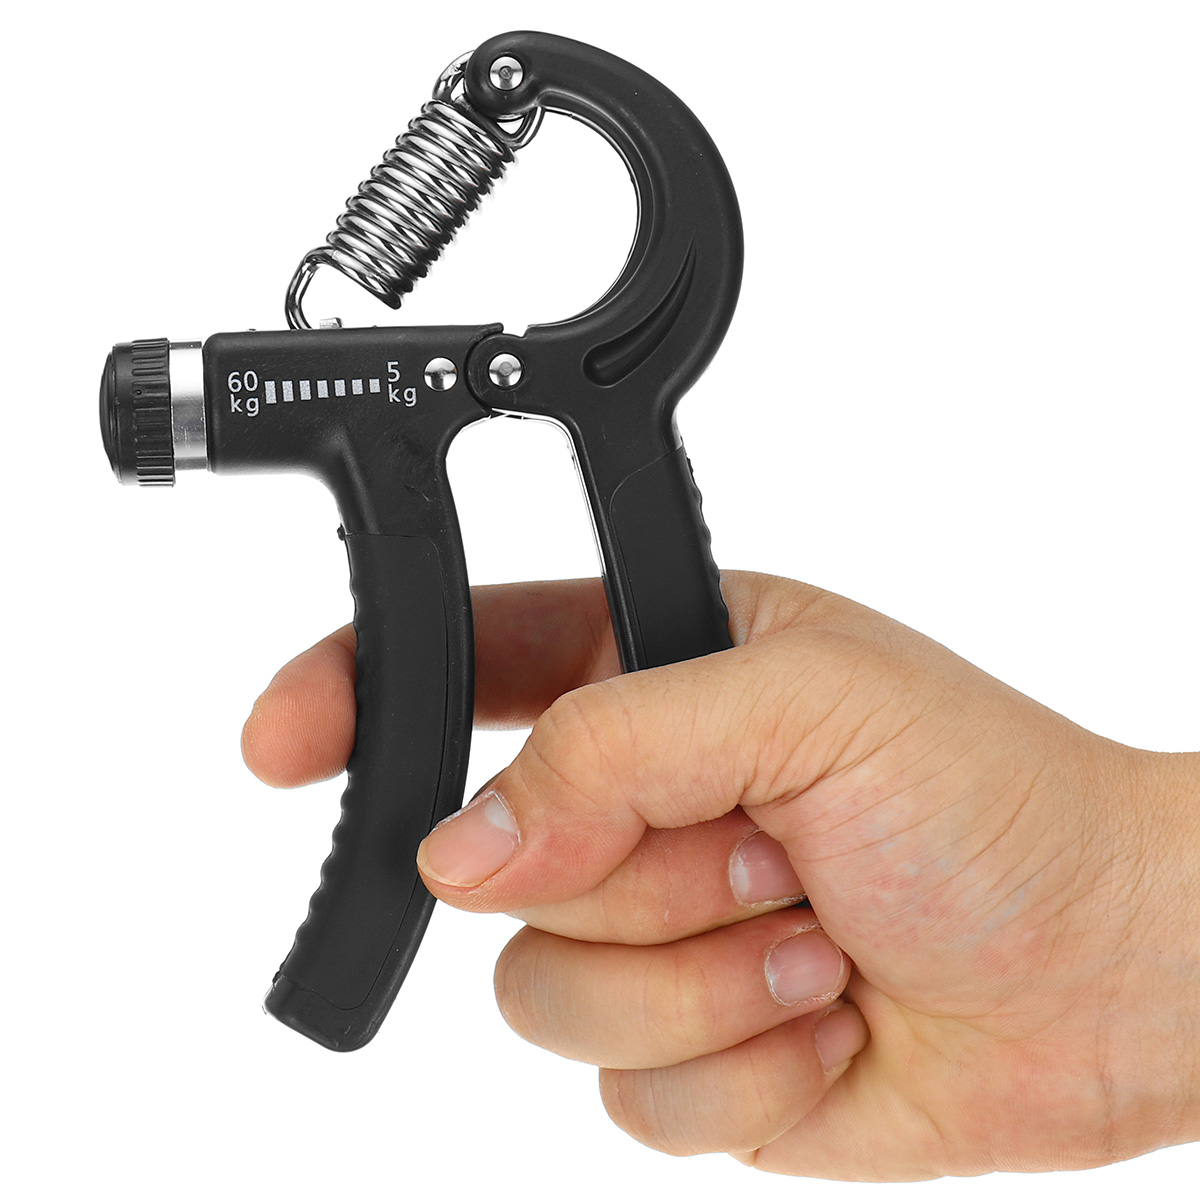 Forearm Grip Workout Laelr 2 Pack Hand Grip Strengthener Adjustable Grip Strength Trainer Non-Slip Forearm Grip Workout Equipment Perfect for Hand Rehabilitation Exercising Resistance 11-132 lbs